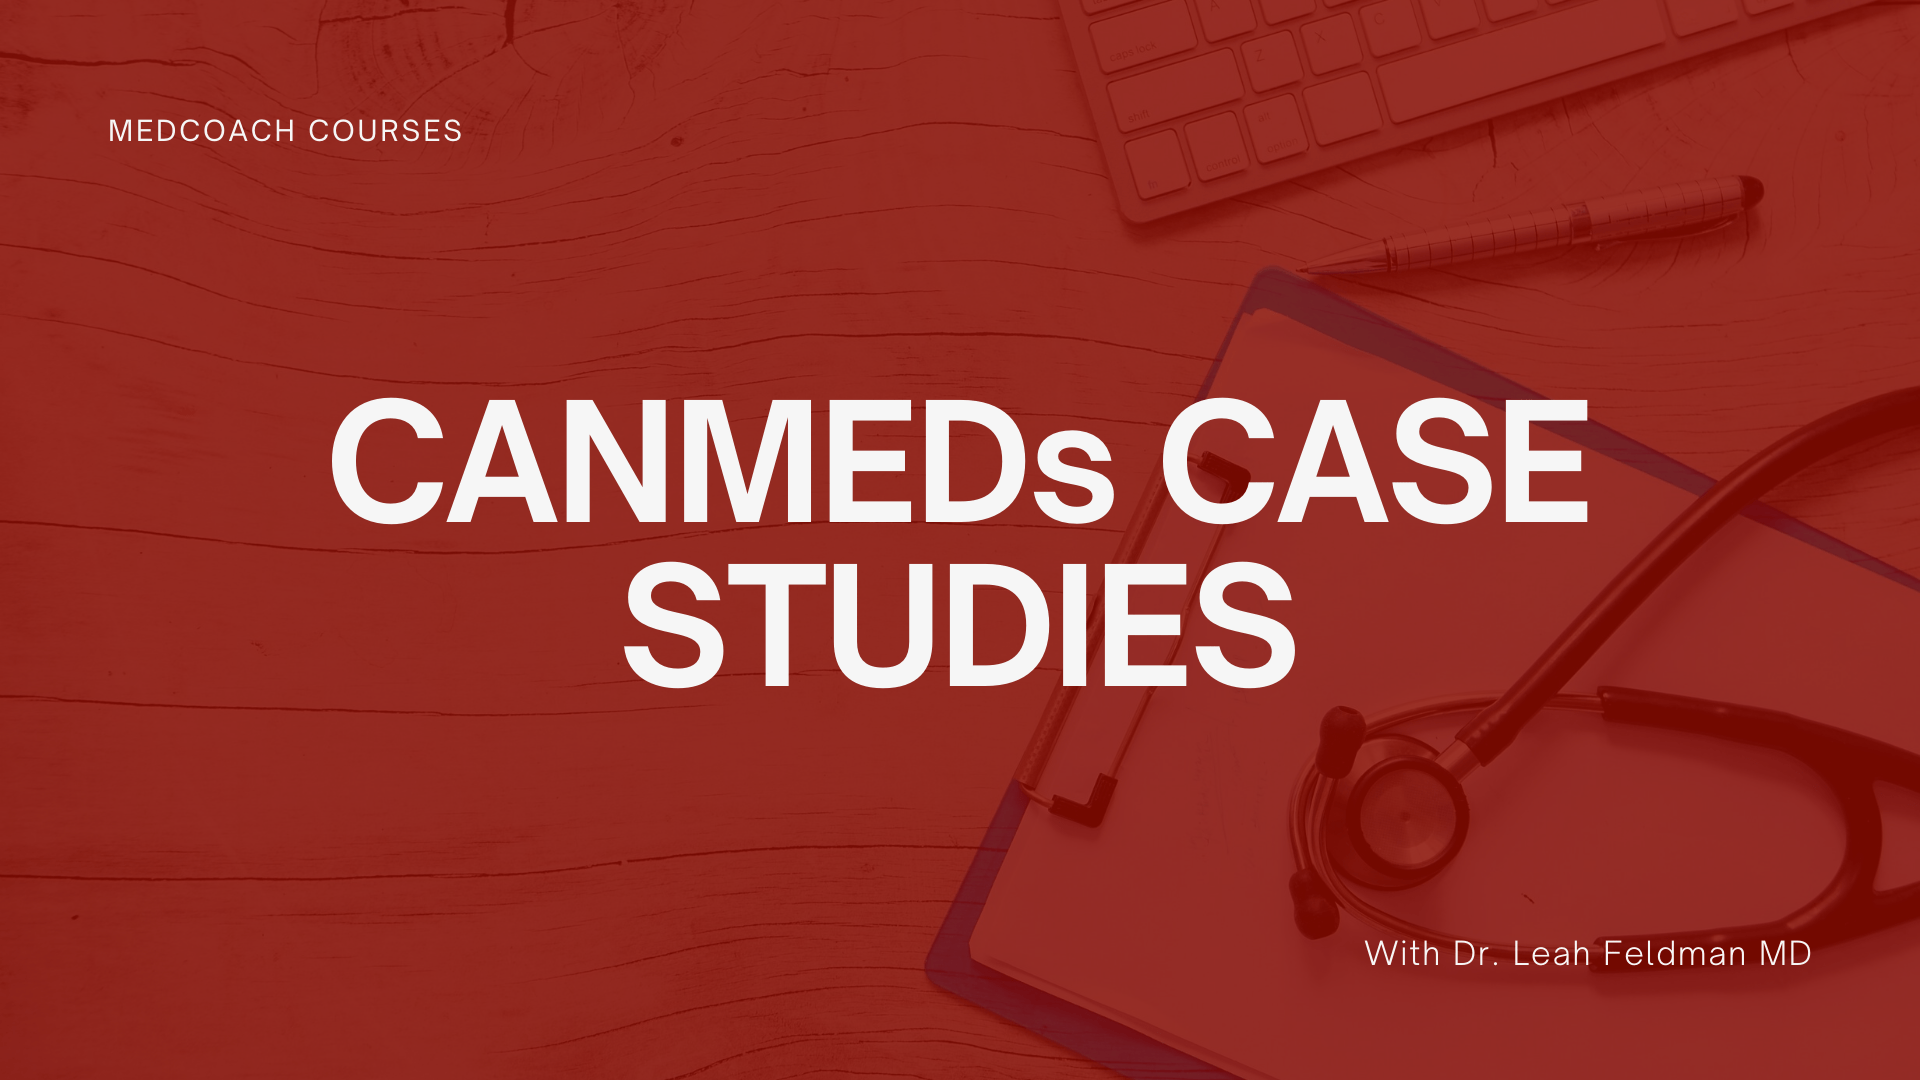 CanMEDs Case Studies